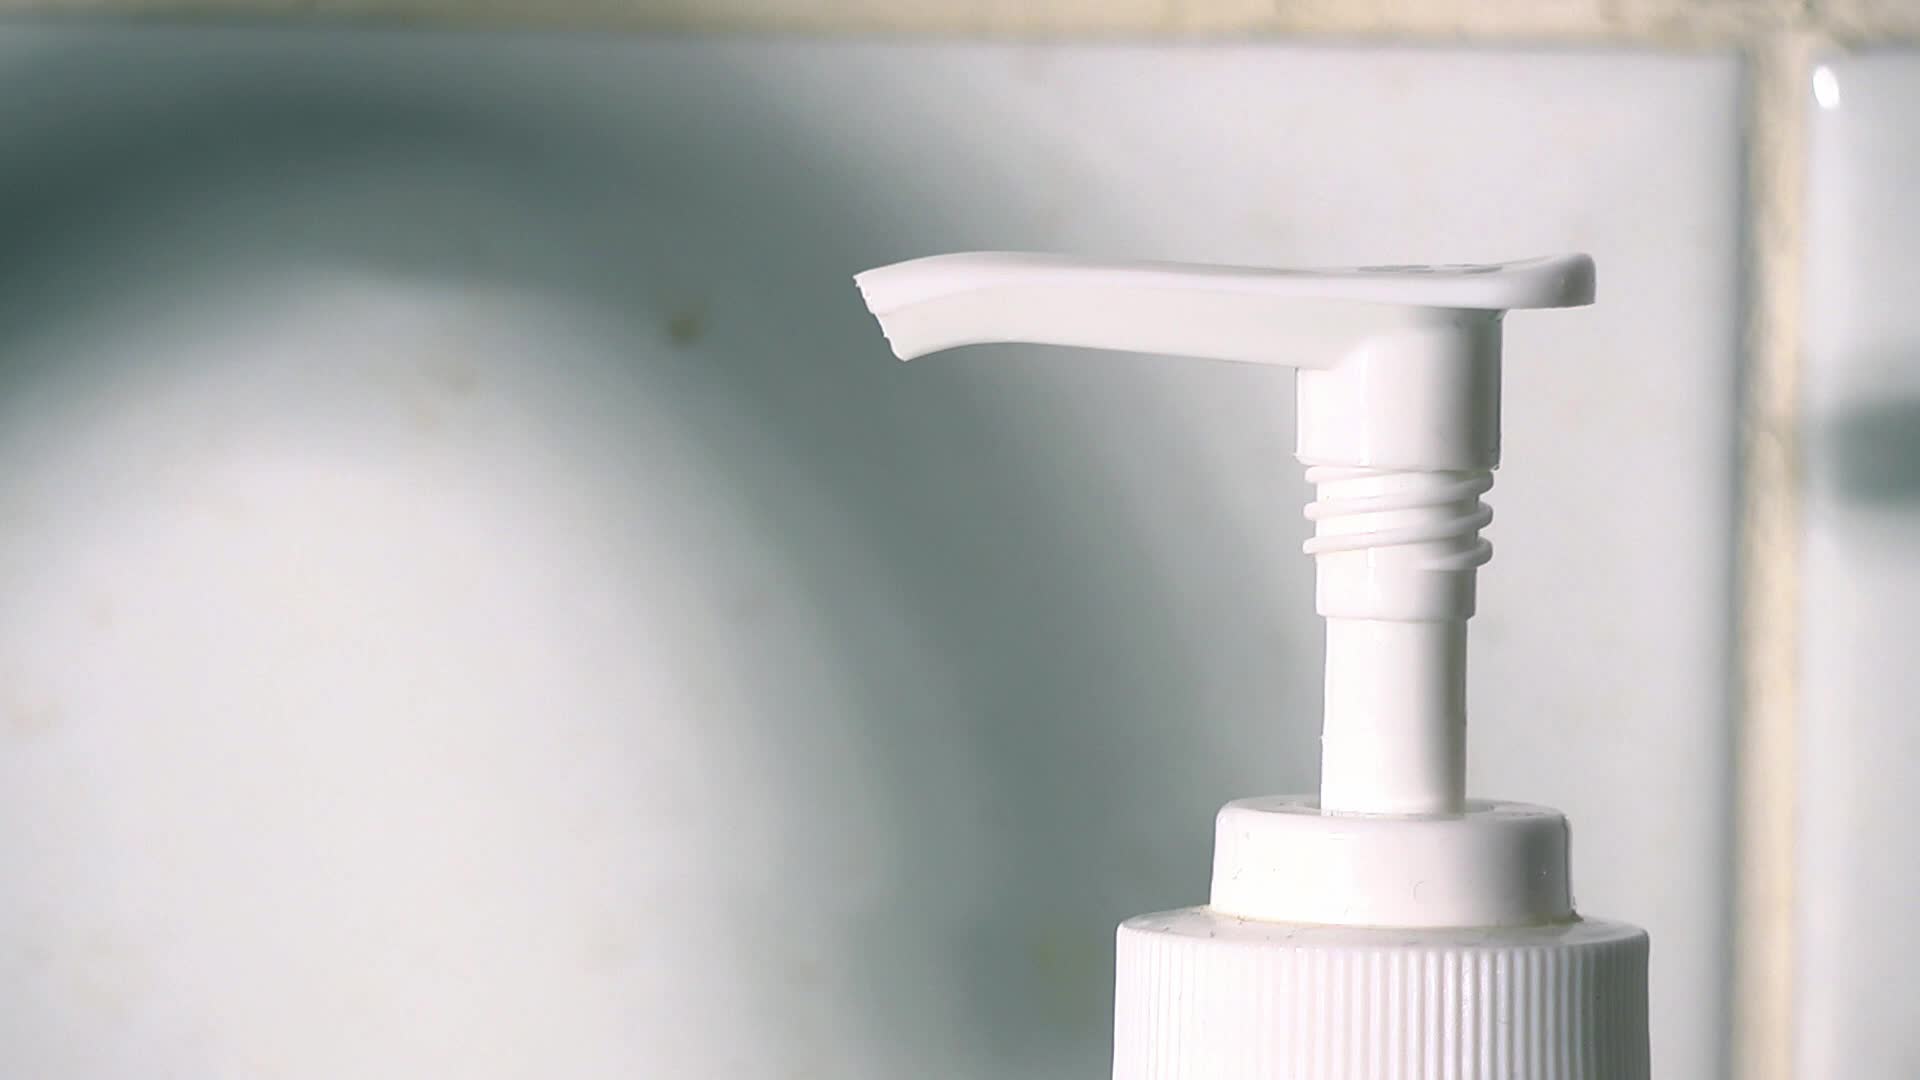 a white soap dispenser is against a tile wall